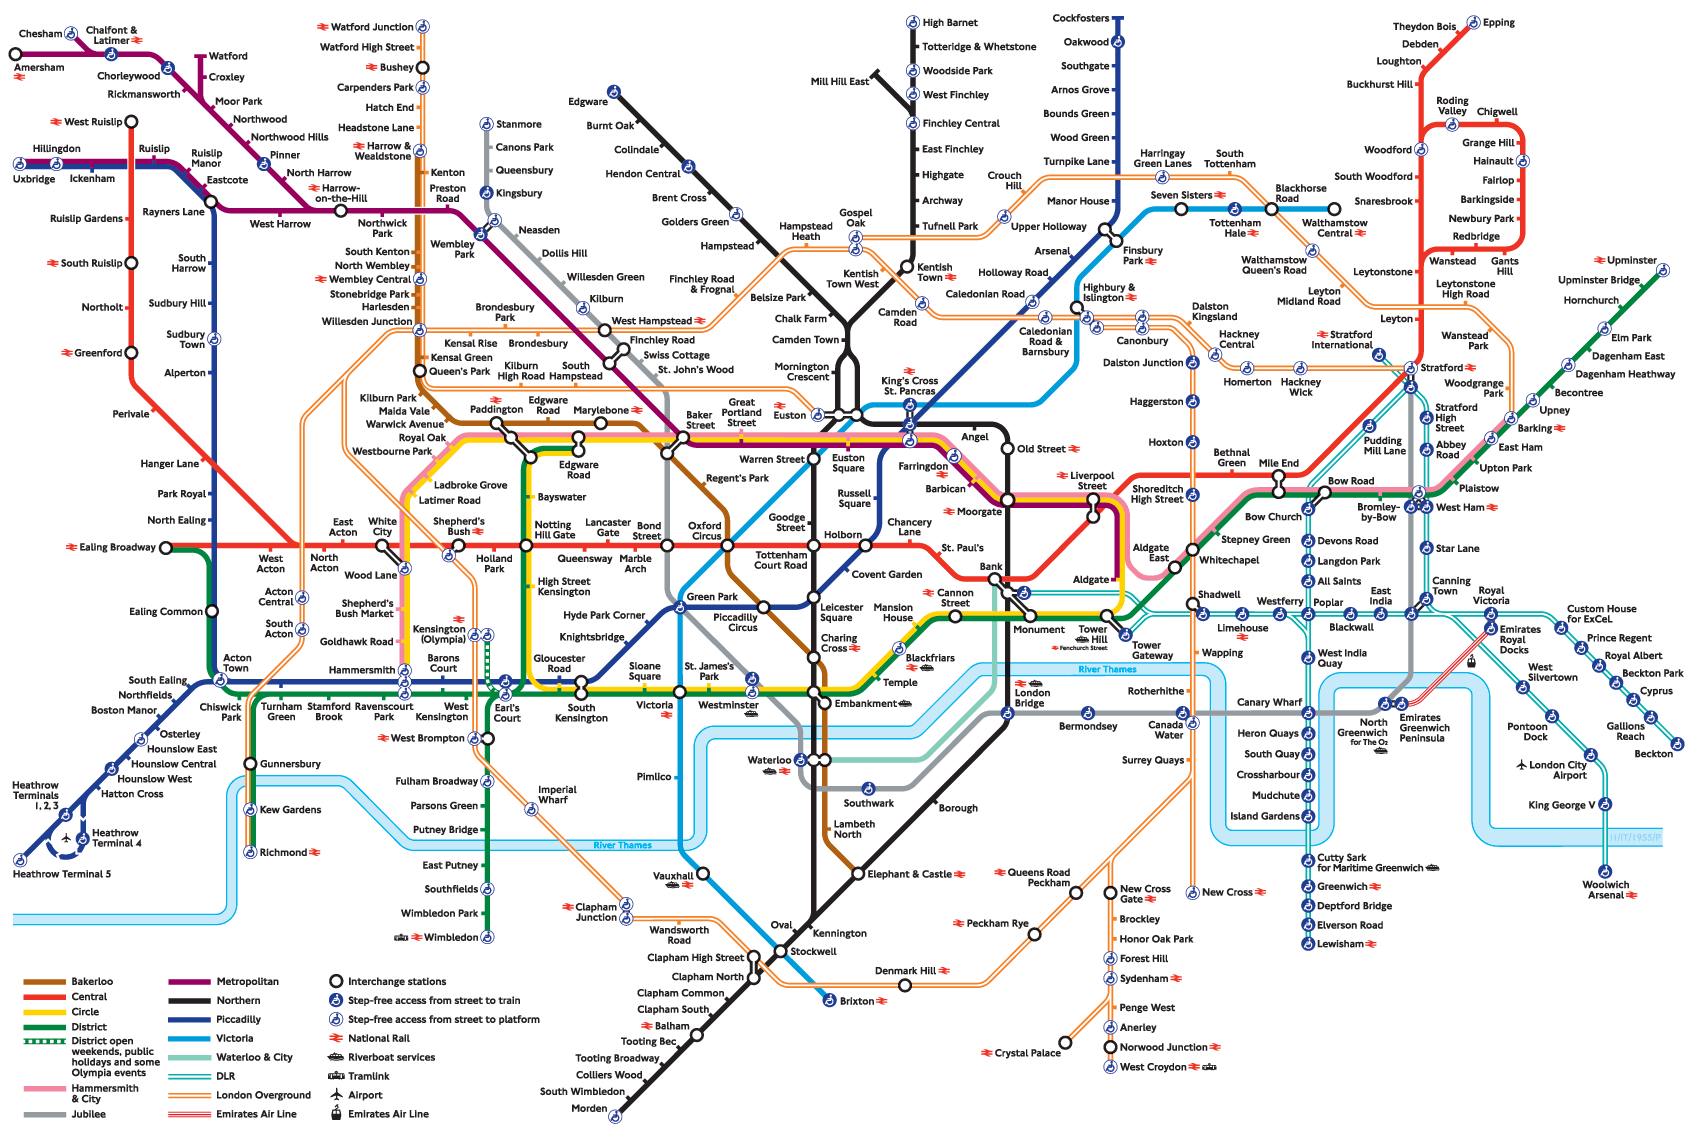 London Underground | London underground, London tube map and Learning